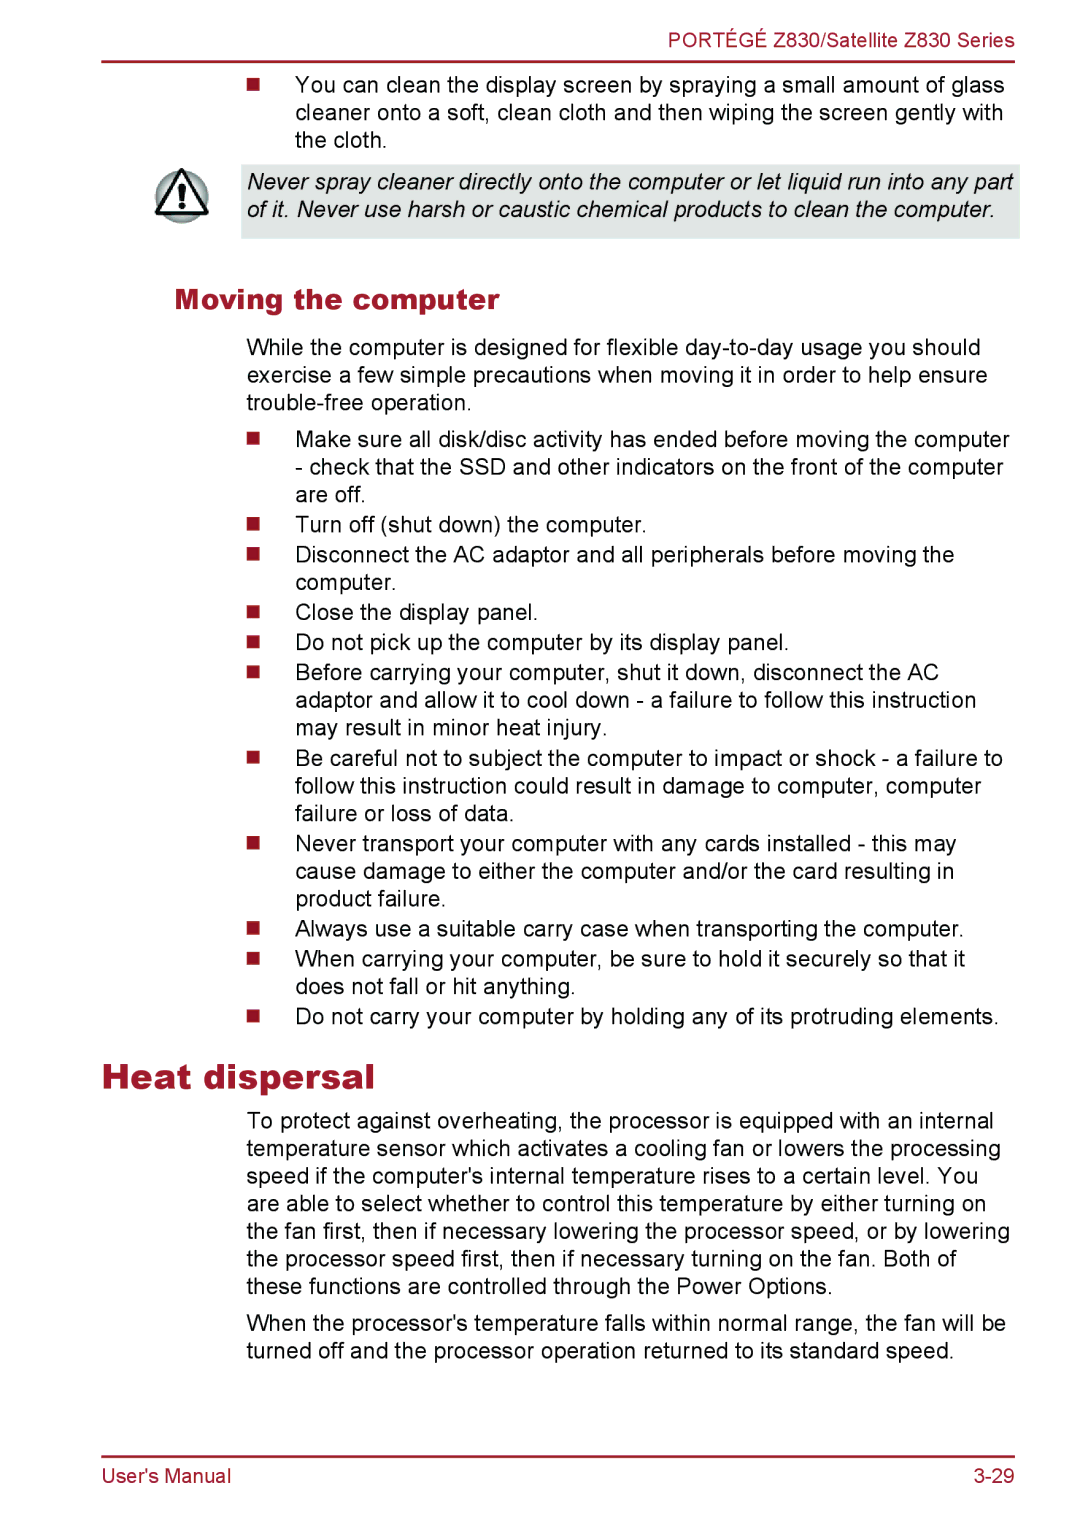 Toshiba Z830 user manual Heat dispersal, Moving the computer 